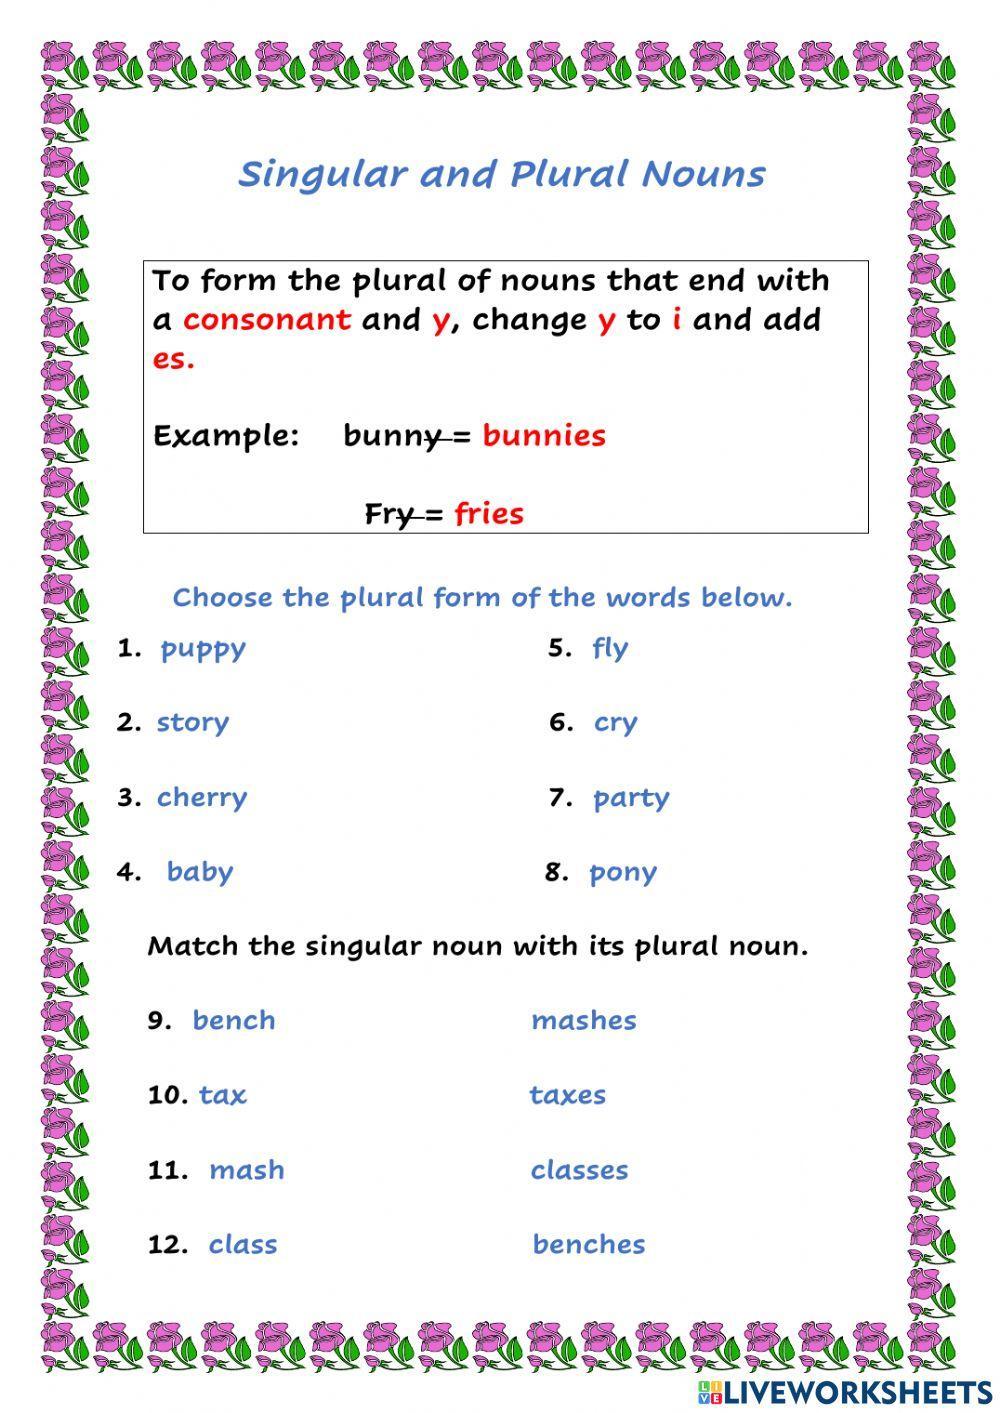 Plural Nouns with ies and es